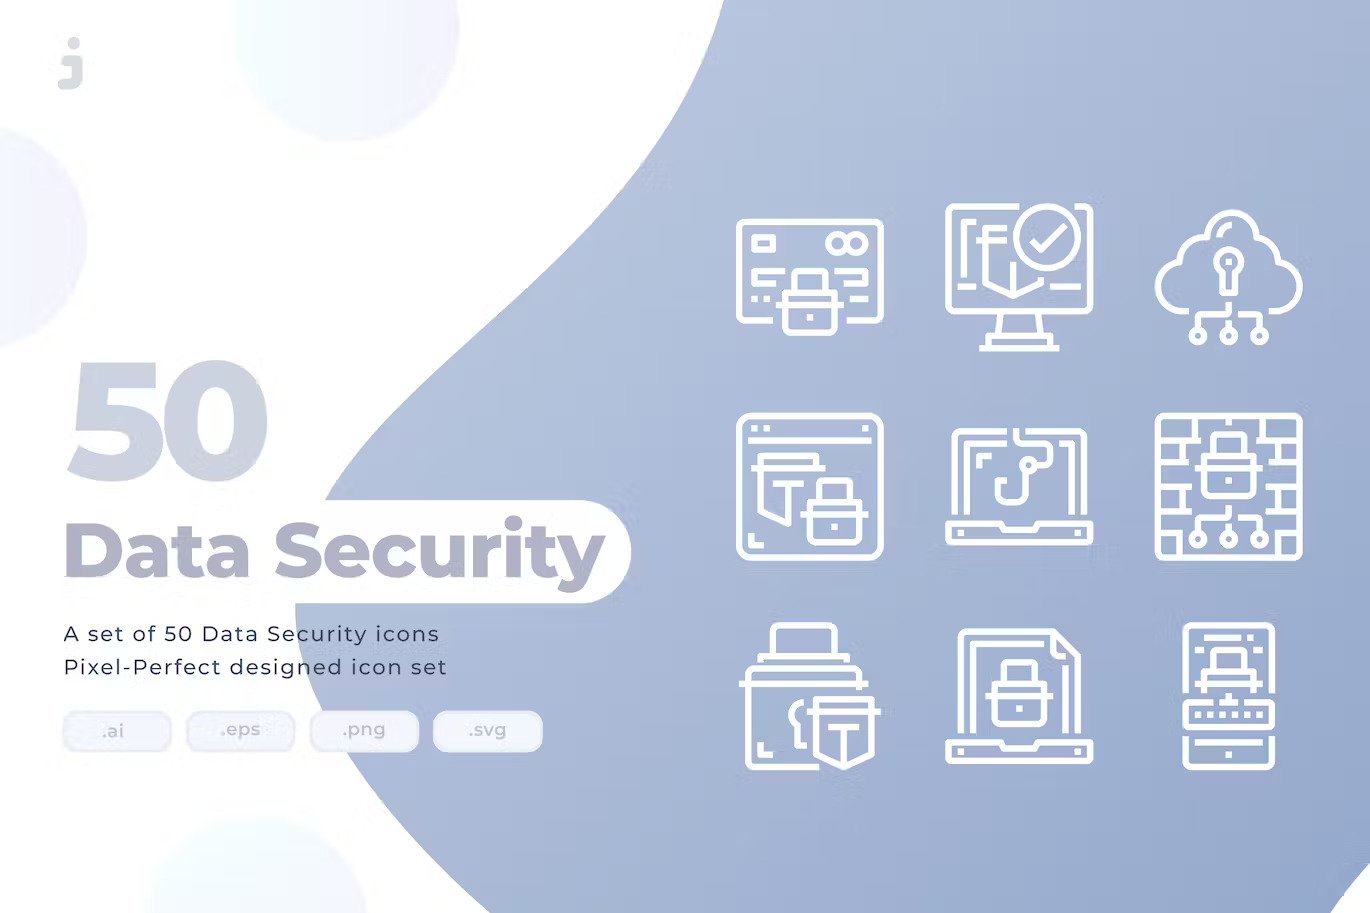 A set of data security icons